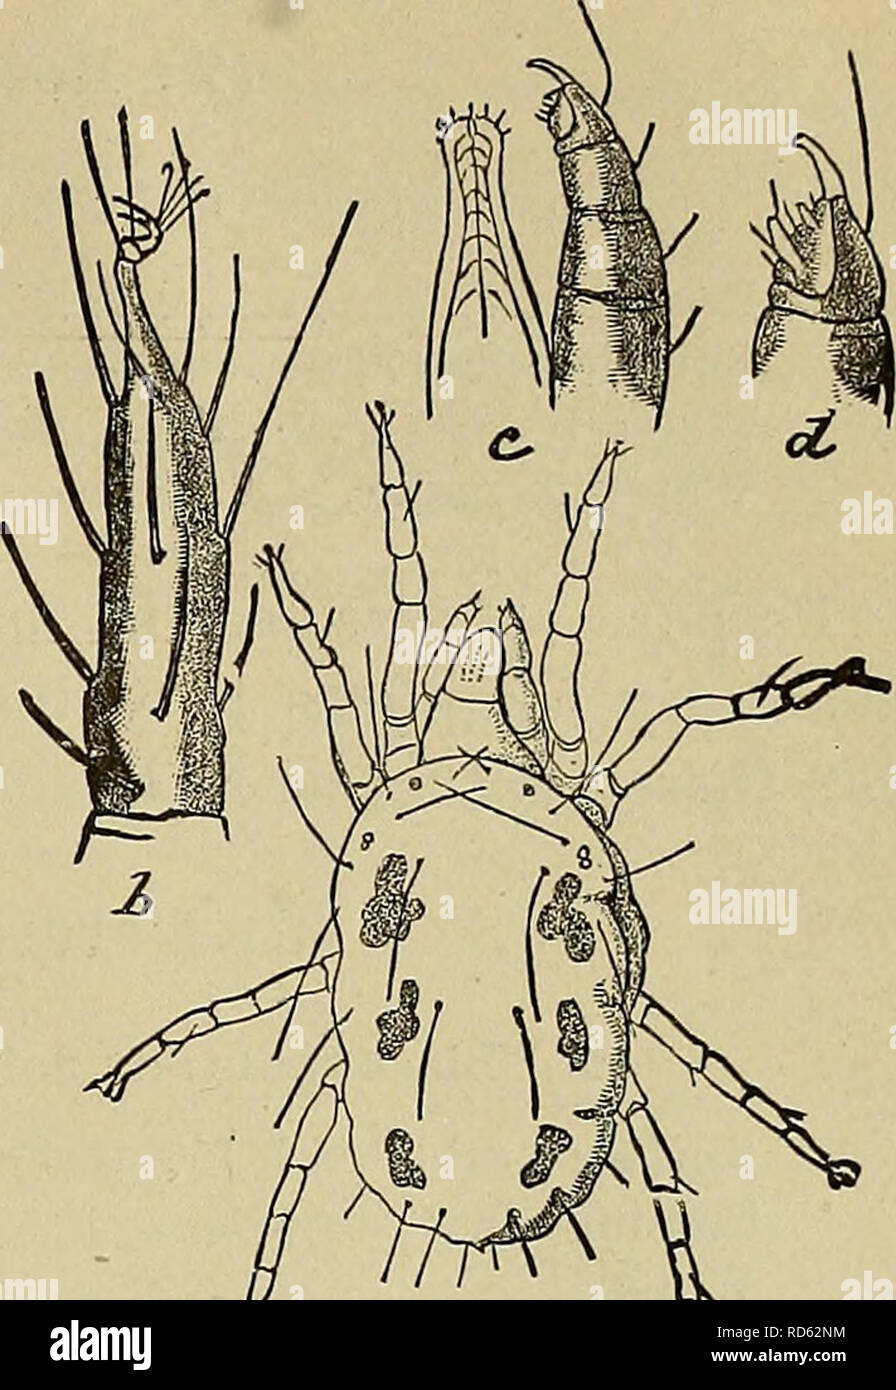 . Culture of the citrus in California. Citrus fruits; Fruit-culture. INSECT PESTS—FORMULAS FOR THEFR DESTRUCTION. 255 SIX-SPOTTED MITE. Tetranychus 6-maculatus, Riley. This mite was introduced into the lower portion of the State on citrus trees from Florida. In that State it has done consider- able damage to citrus fruits. Infested trees may be recognized by a mottled appearance. The mites congregate on the under- side of the leaves, usually pro- ducing a concavity. The upper surface of the leaves is marked ^ ^^^ with yellow blotches. six-spotted mite. a, insect, enlarged; b, tarsus; c, ros- T Stock Photo